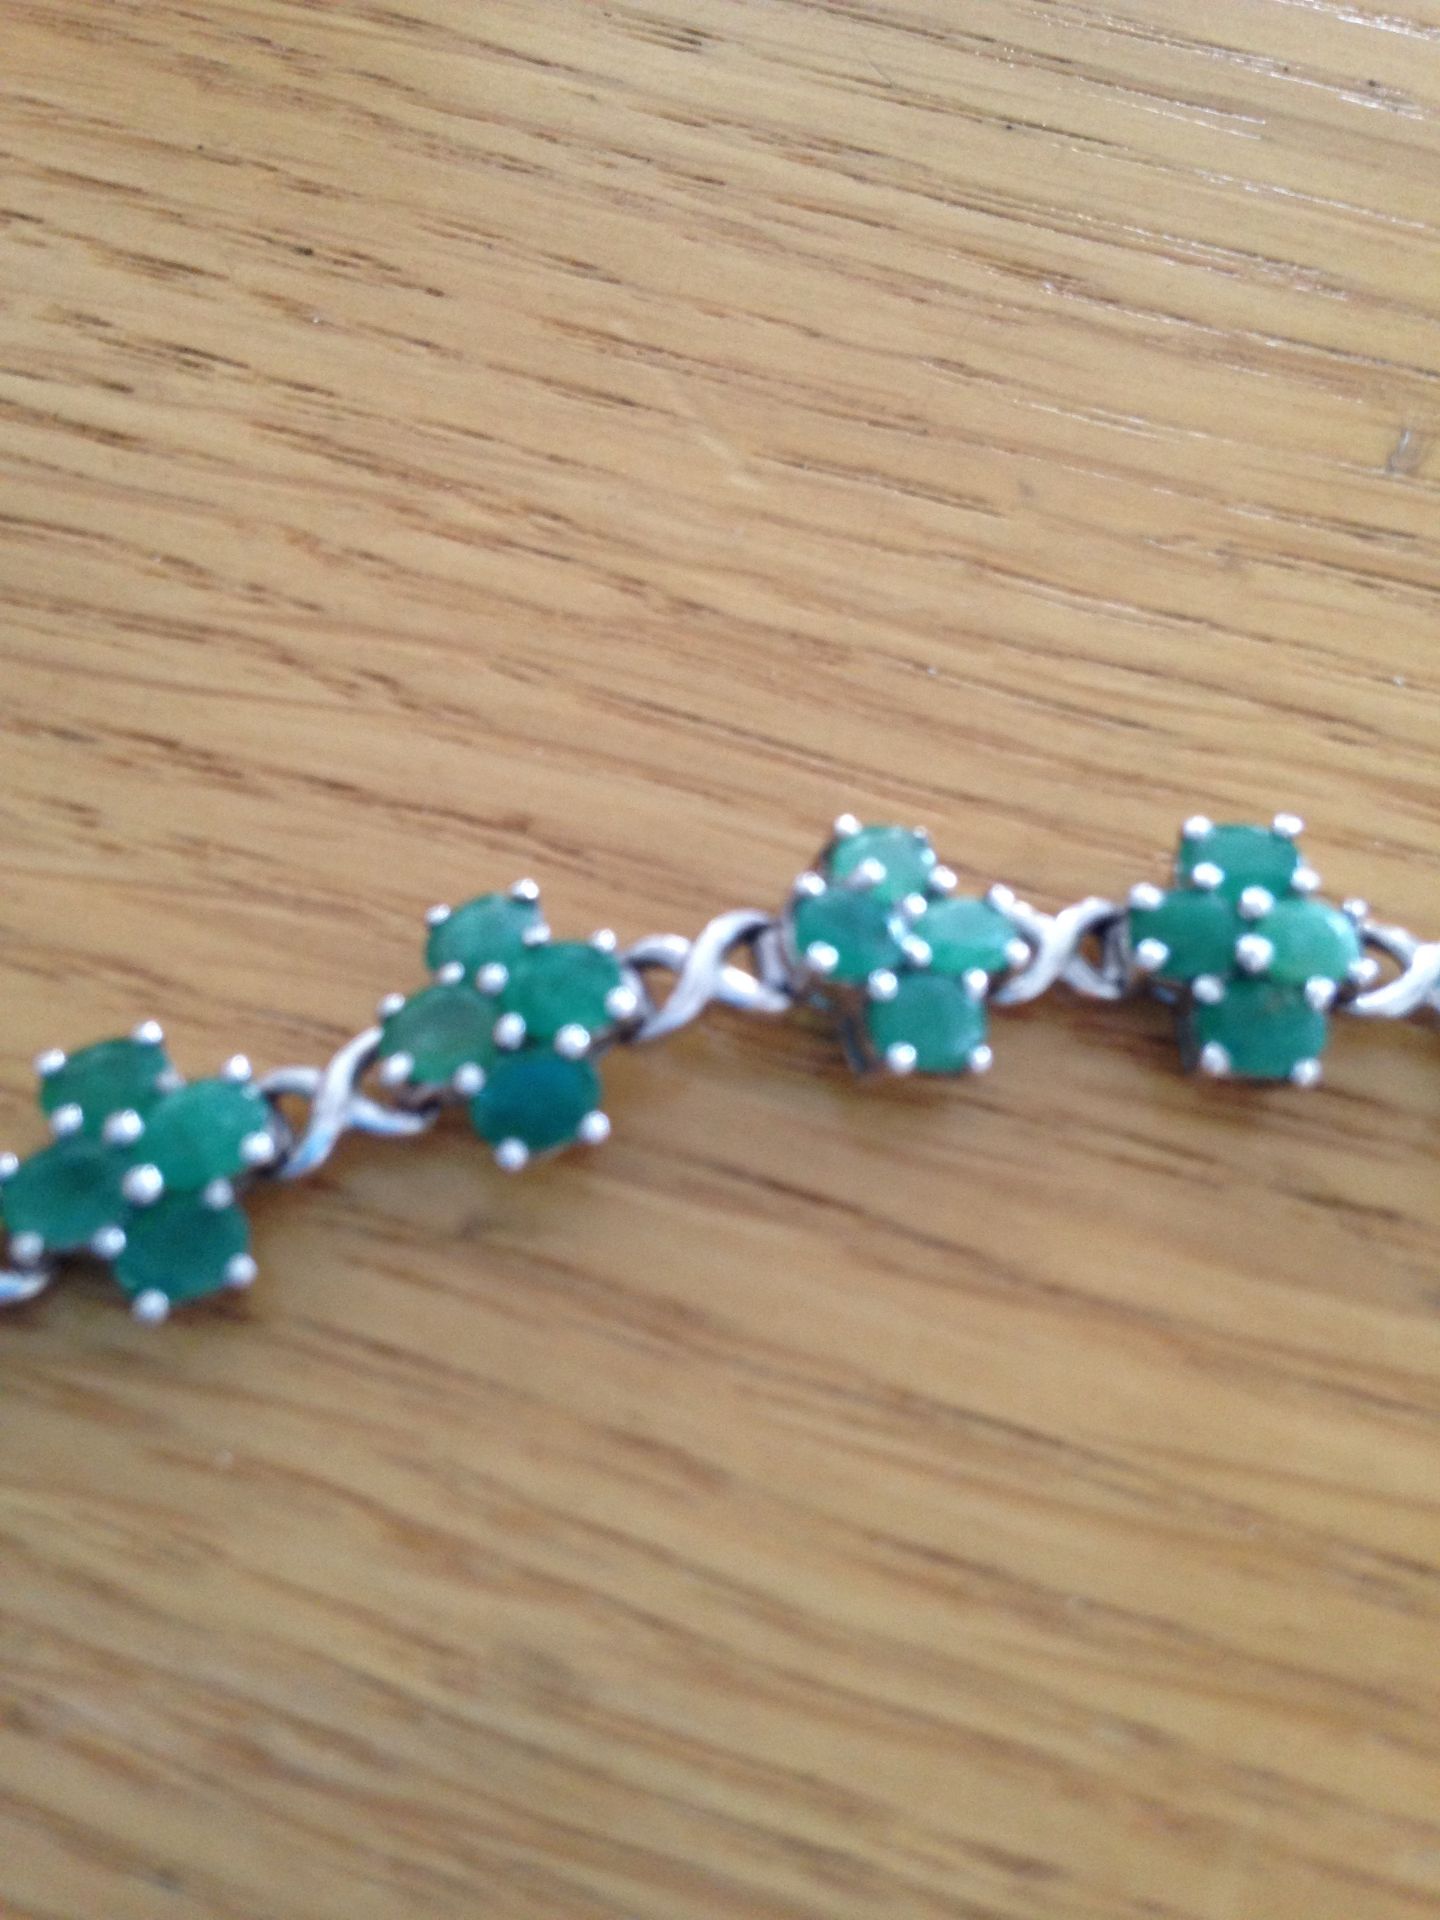 925 Silver and Emerald Bracelet - Image 2 of 2